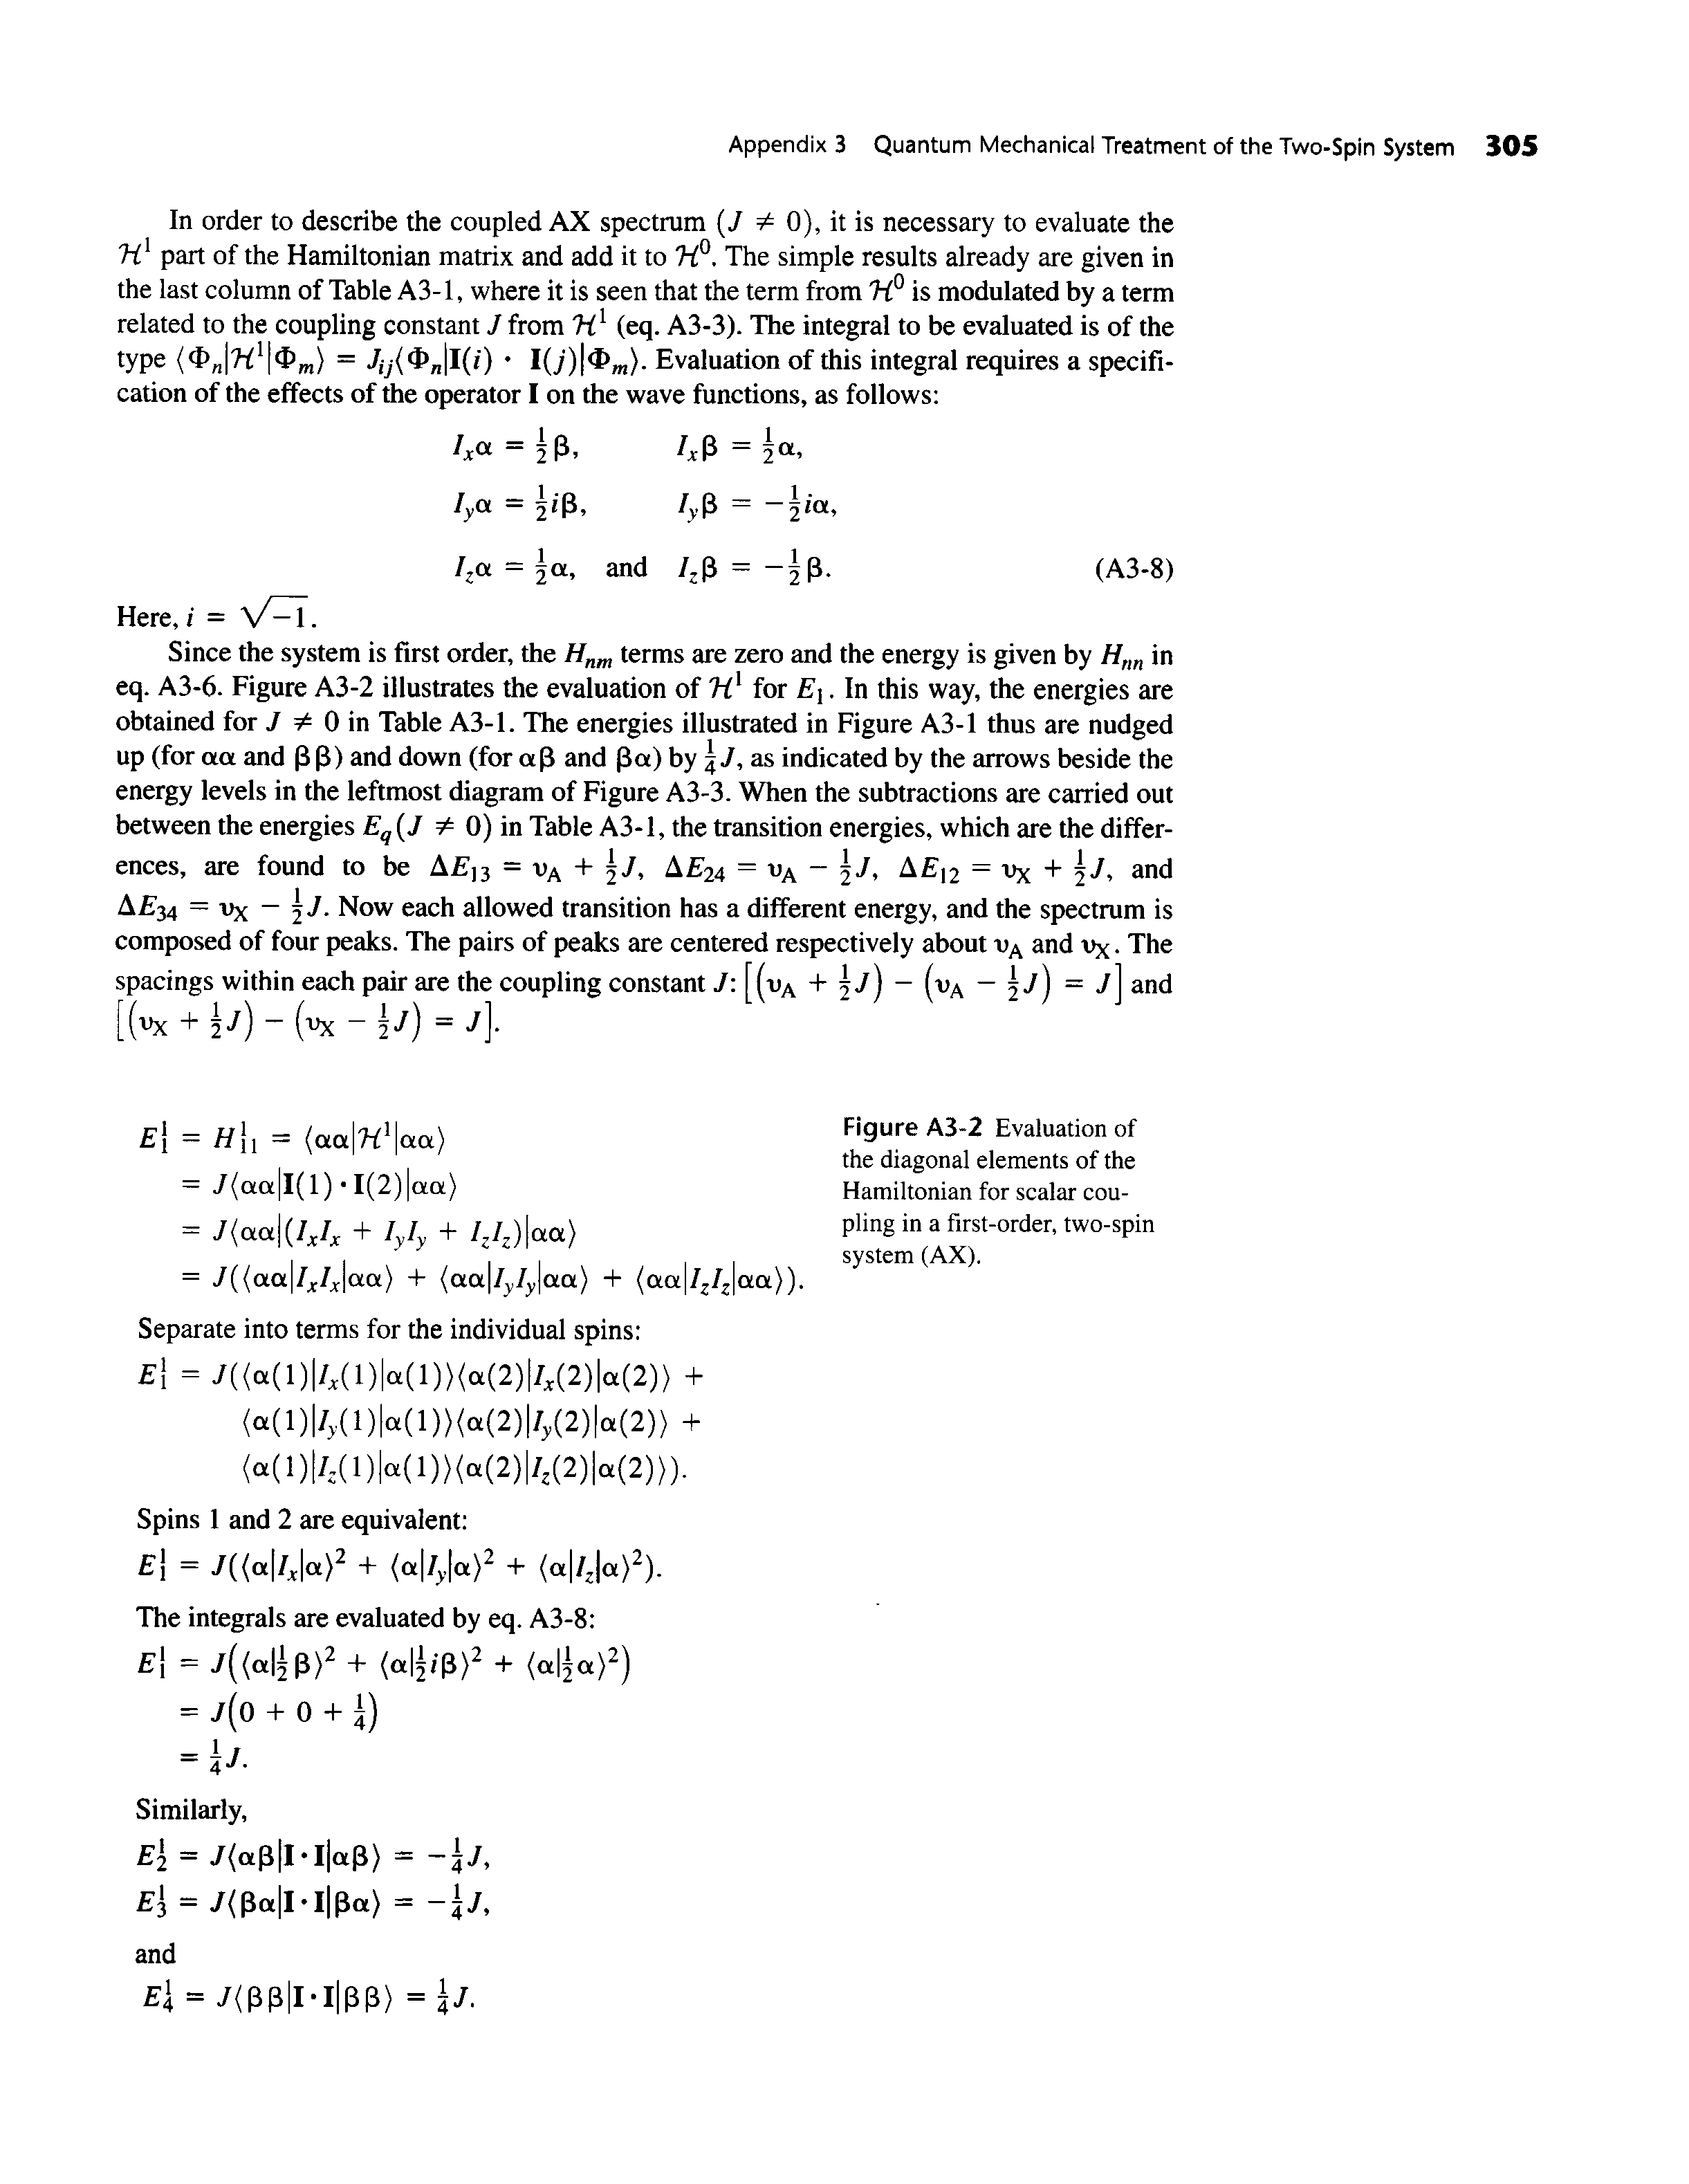 Figure A3 2 Evaluation of the diagonal elements of the Hamiltonian for scalar coupling in a first-order, two-spin system (AX).